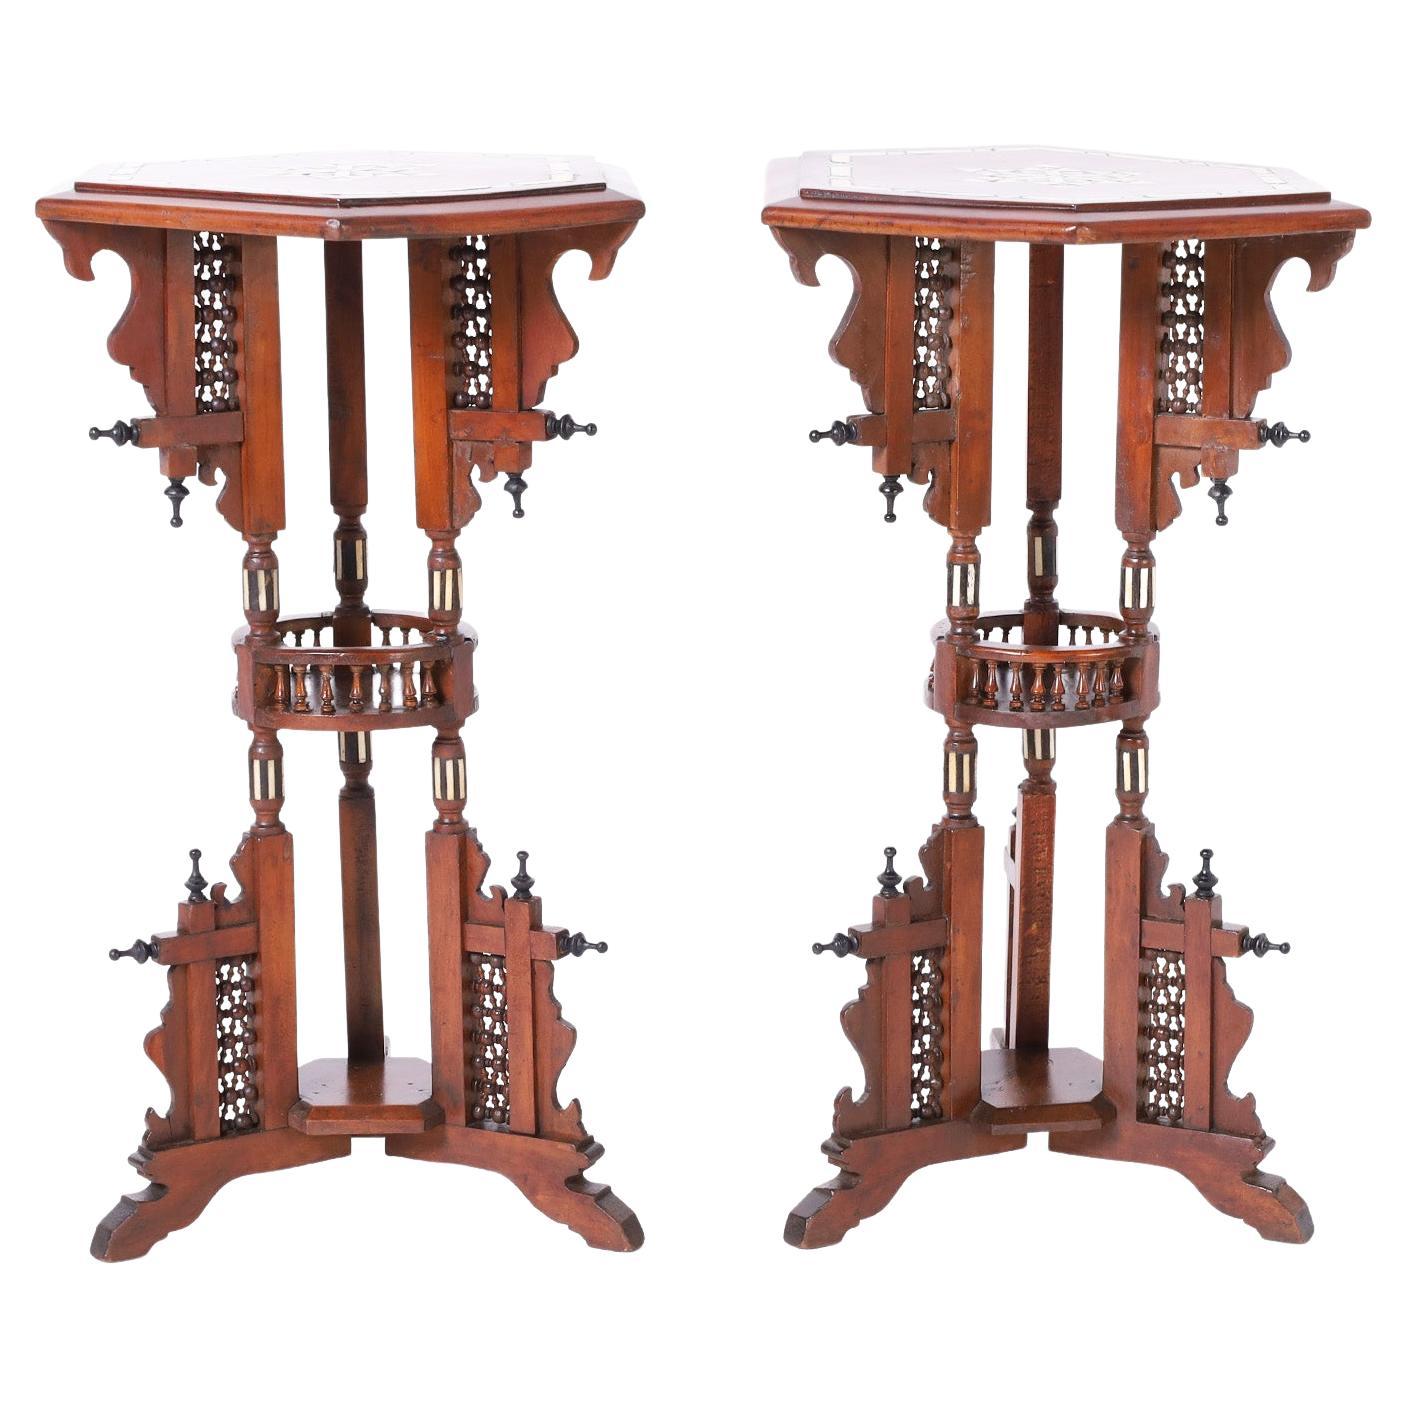 Antique Pair of Moroccan Inlaid Stands or Pedestals